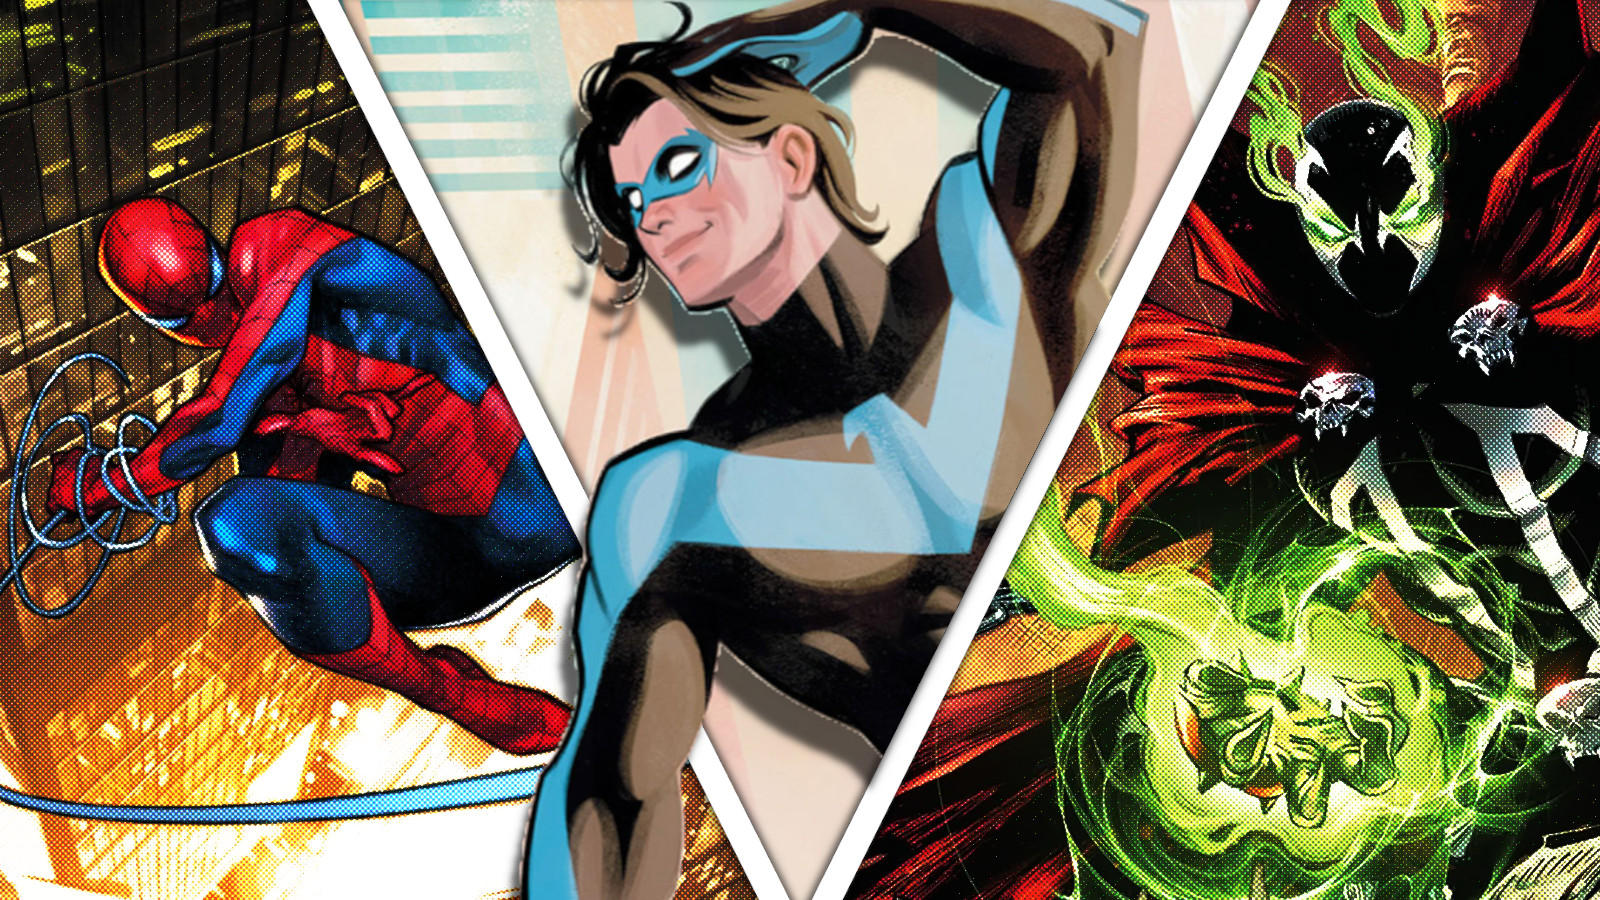 Ultimate Spider-Man, Nightwing, and Spawn key art.